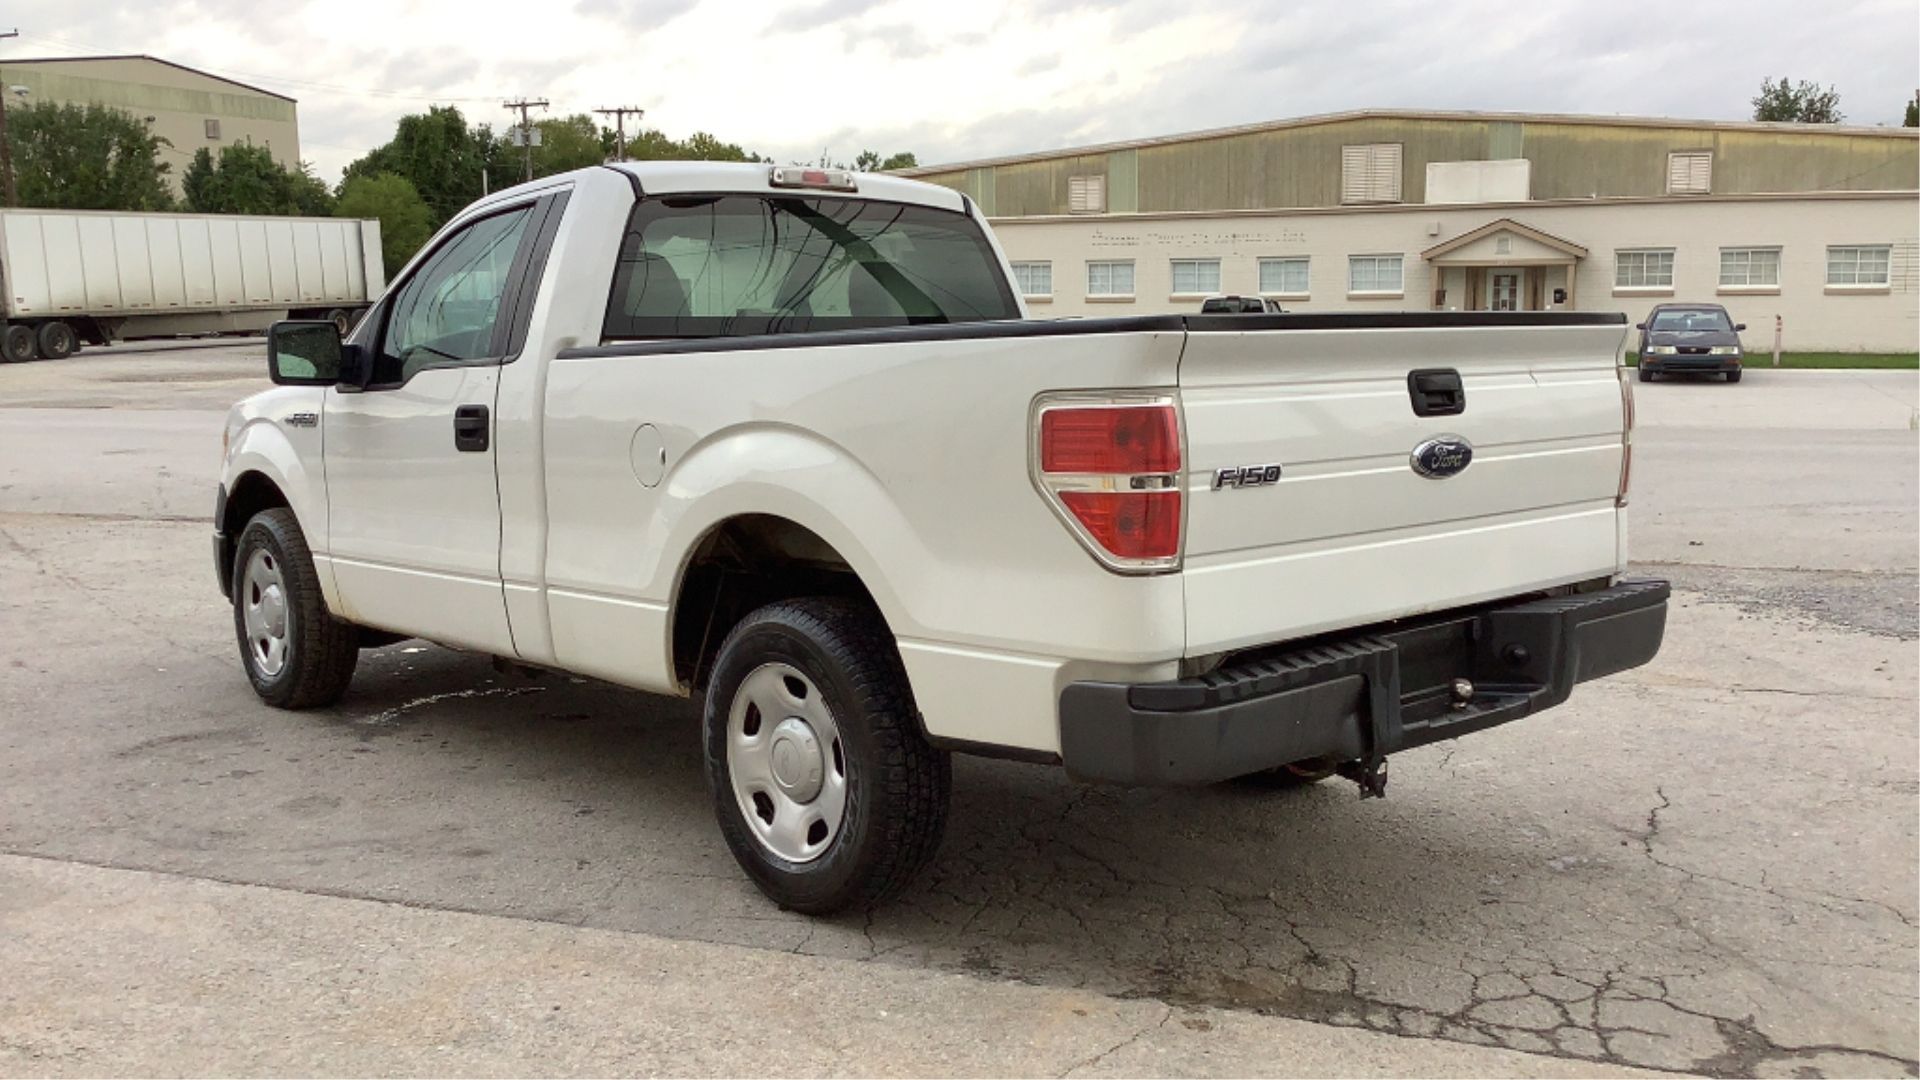 2009 Ford F-150 Regular Cab XL 2WD - Image 12 of 71